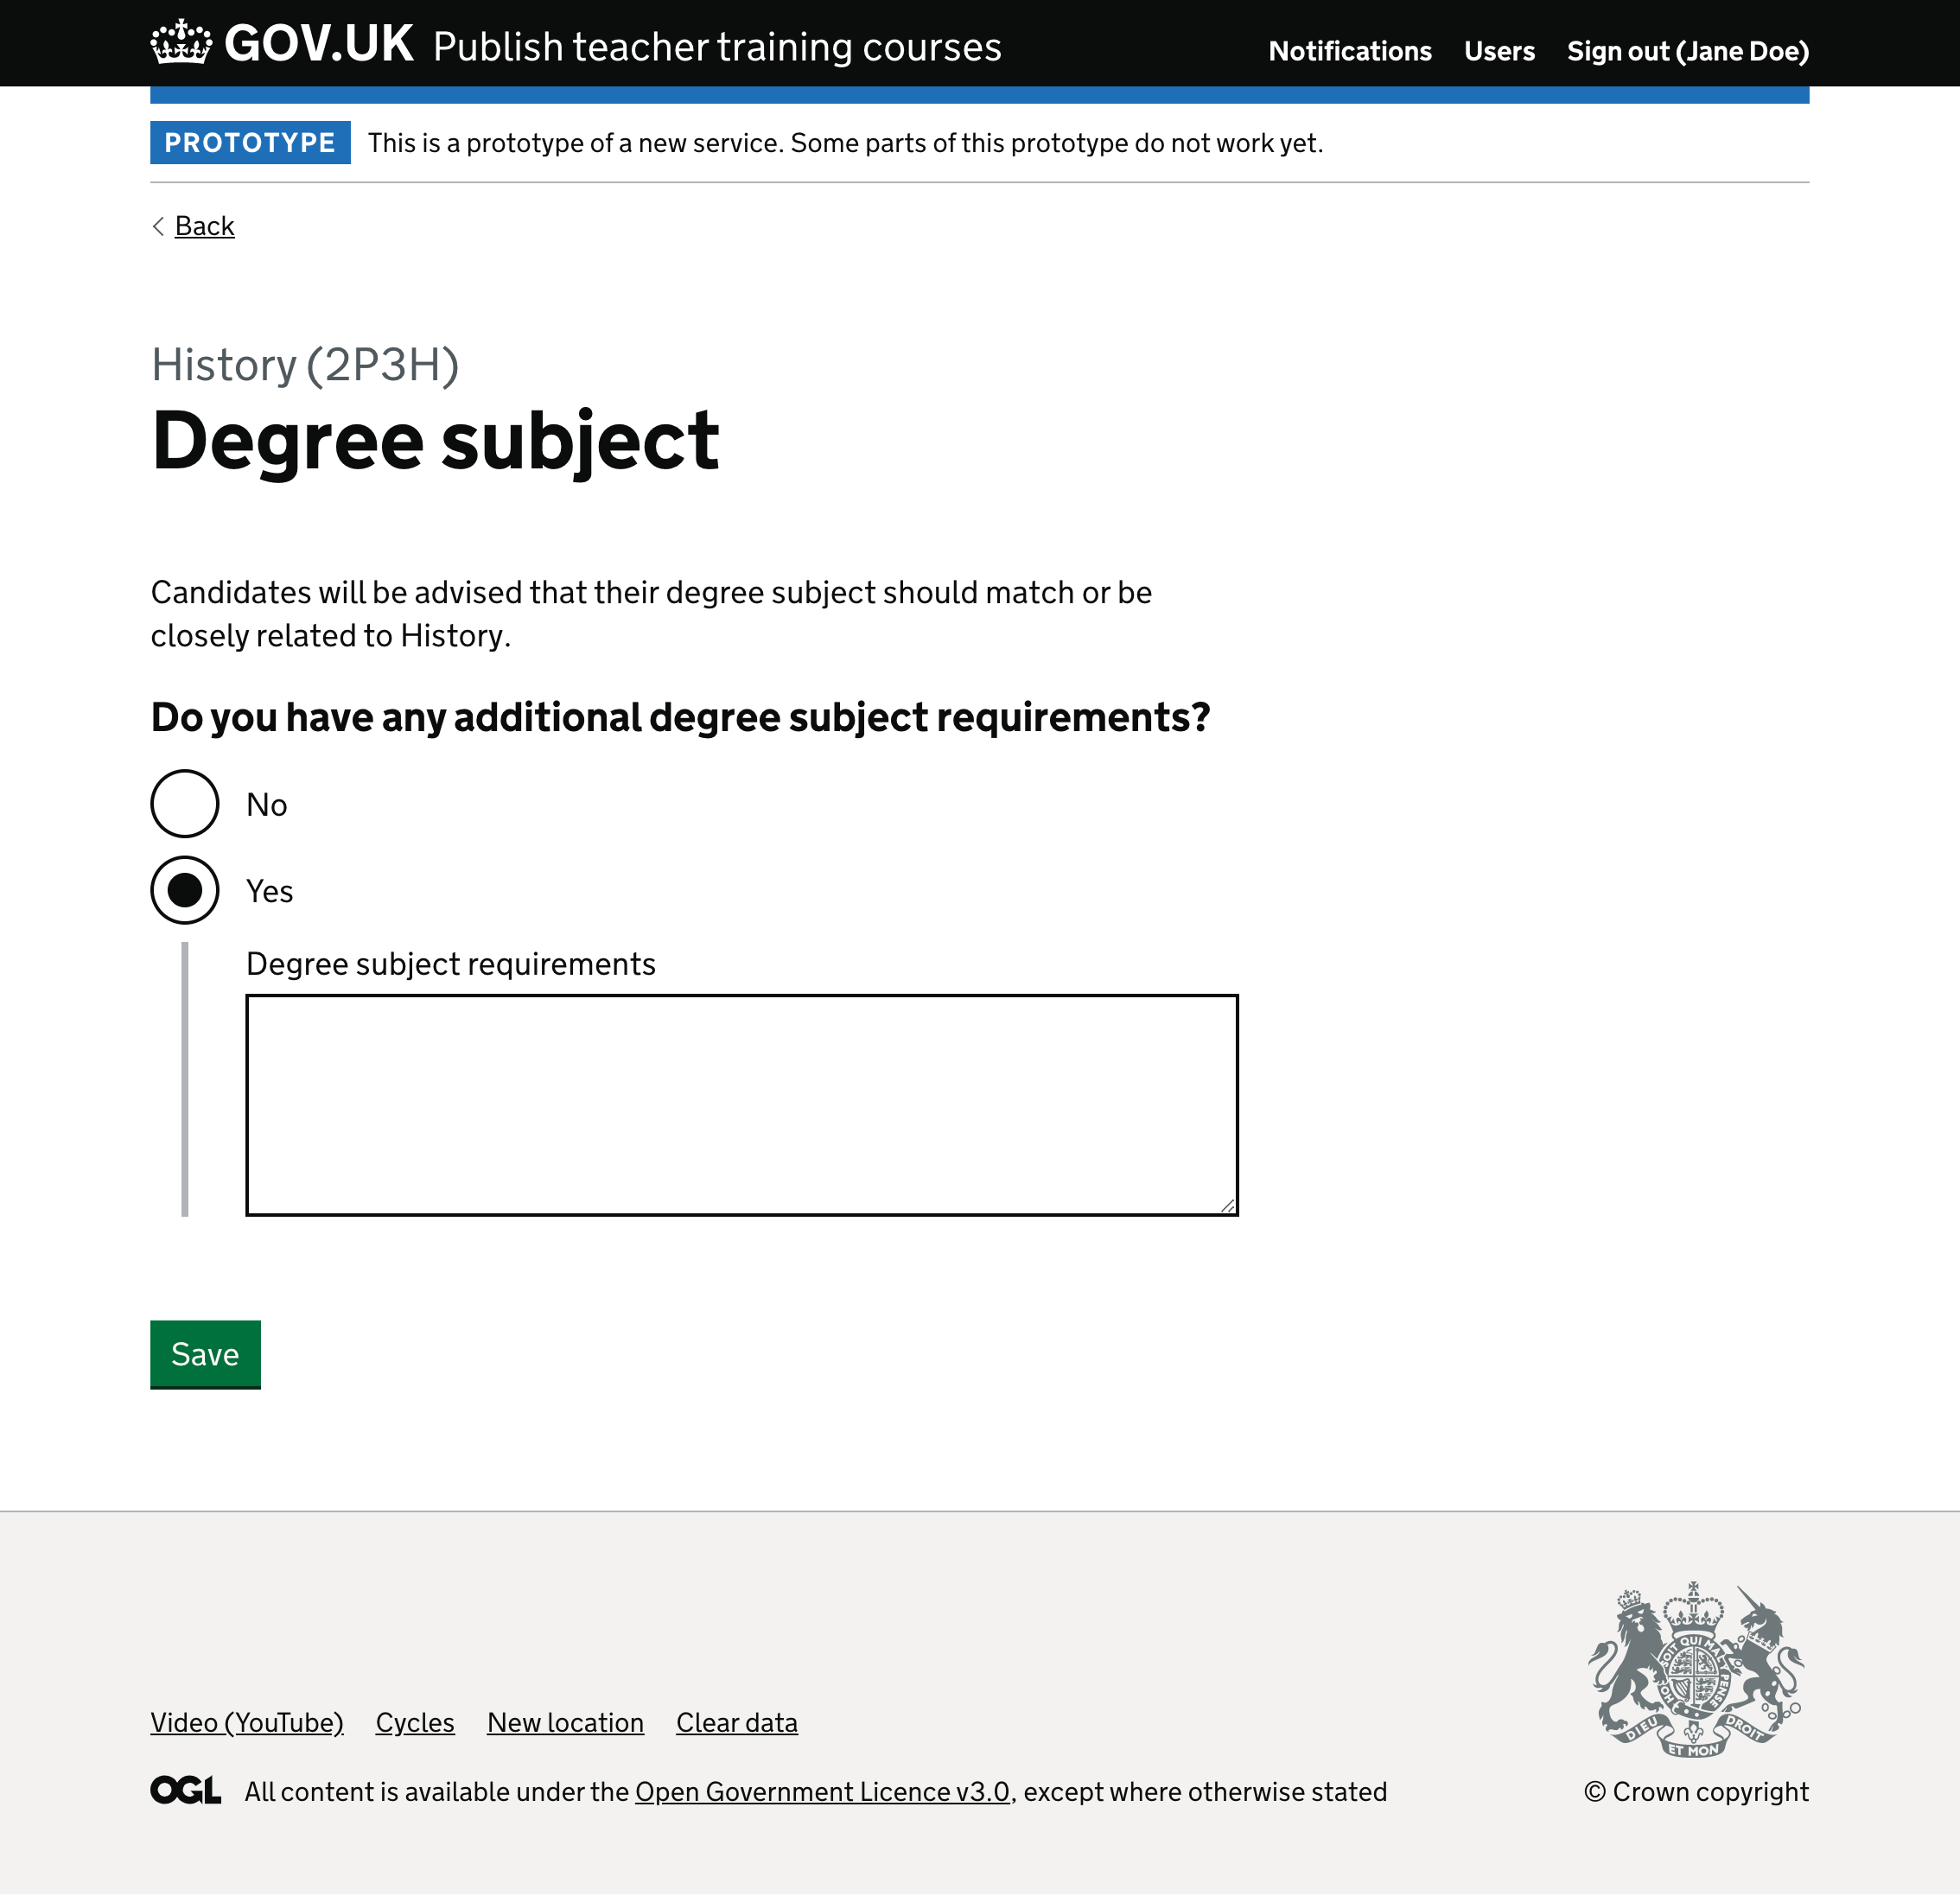 Screenshot of ‘Do you have any additional degree subject requirements?’ form.